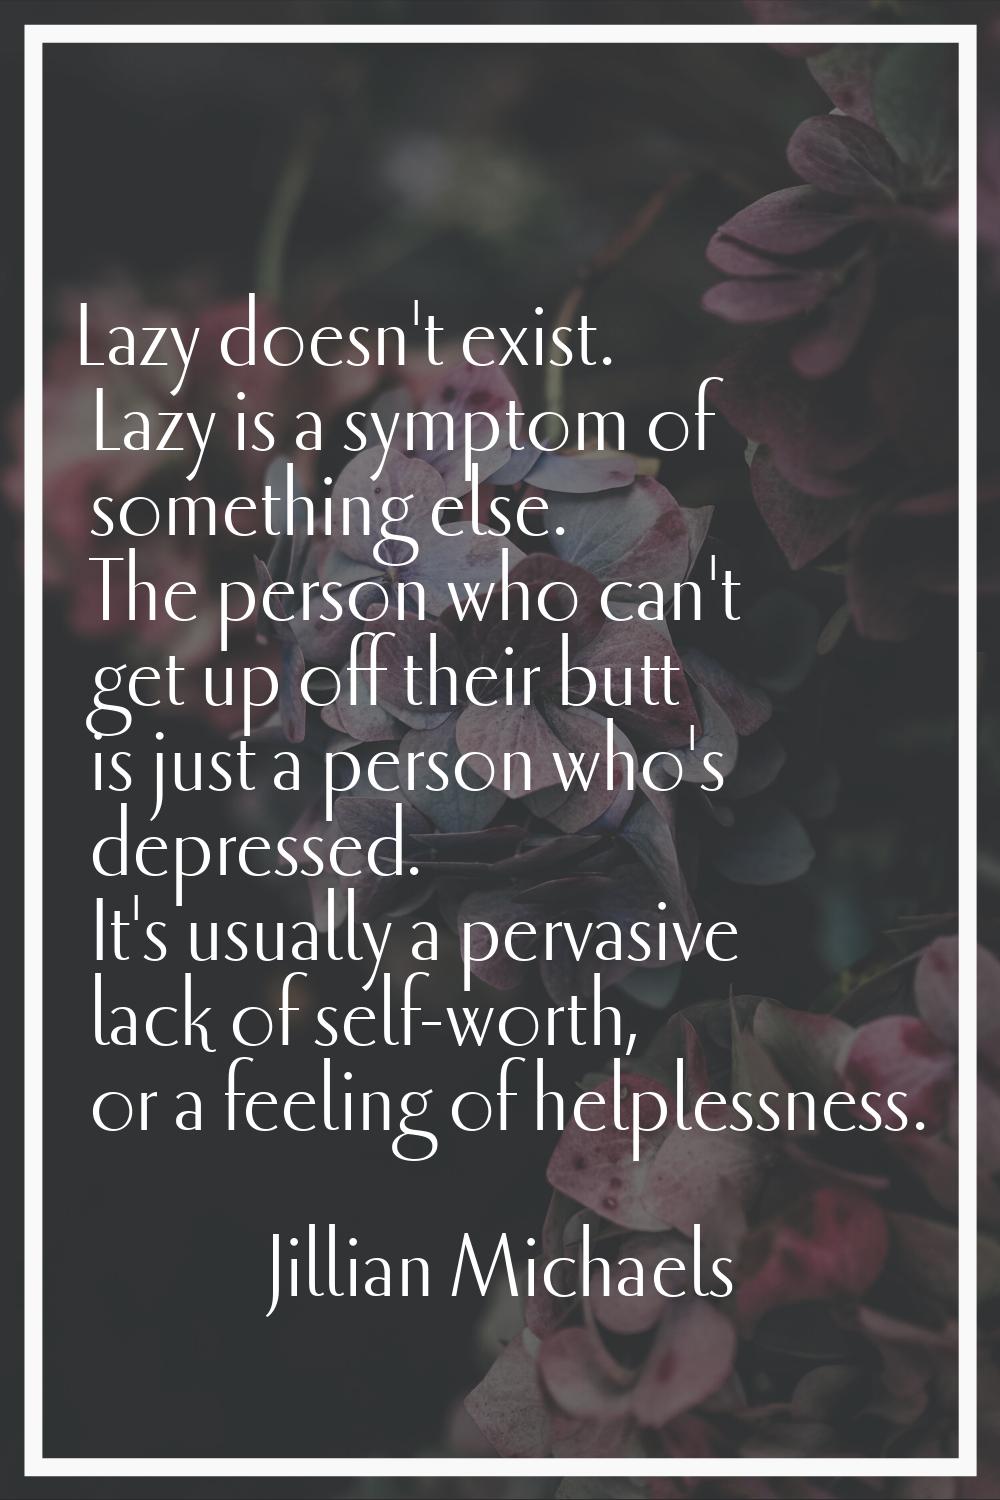 Lazy doesn't exist. Lazy is a symptom of something else. The person who can't get up off their butt